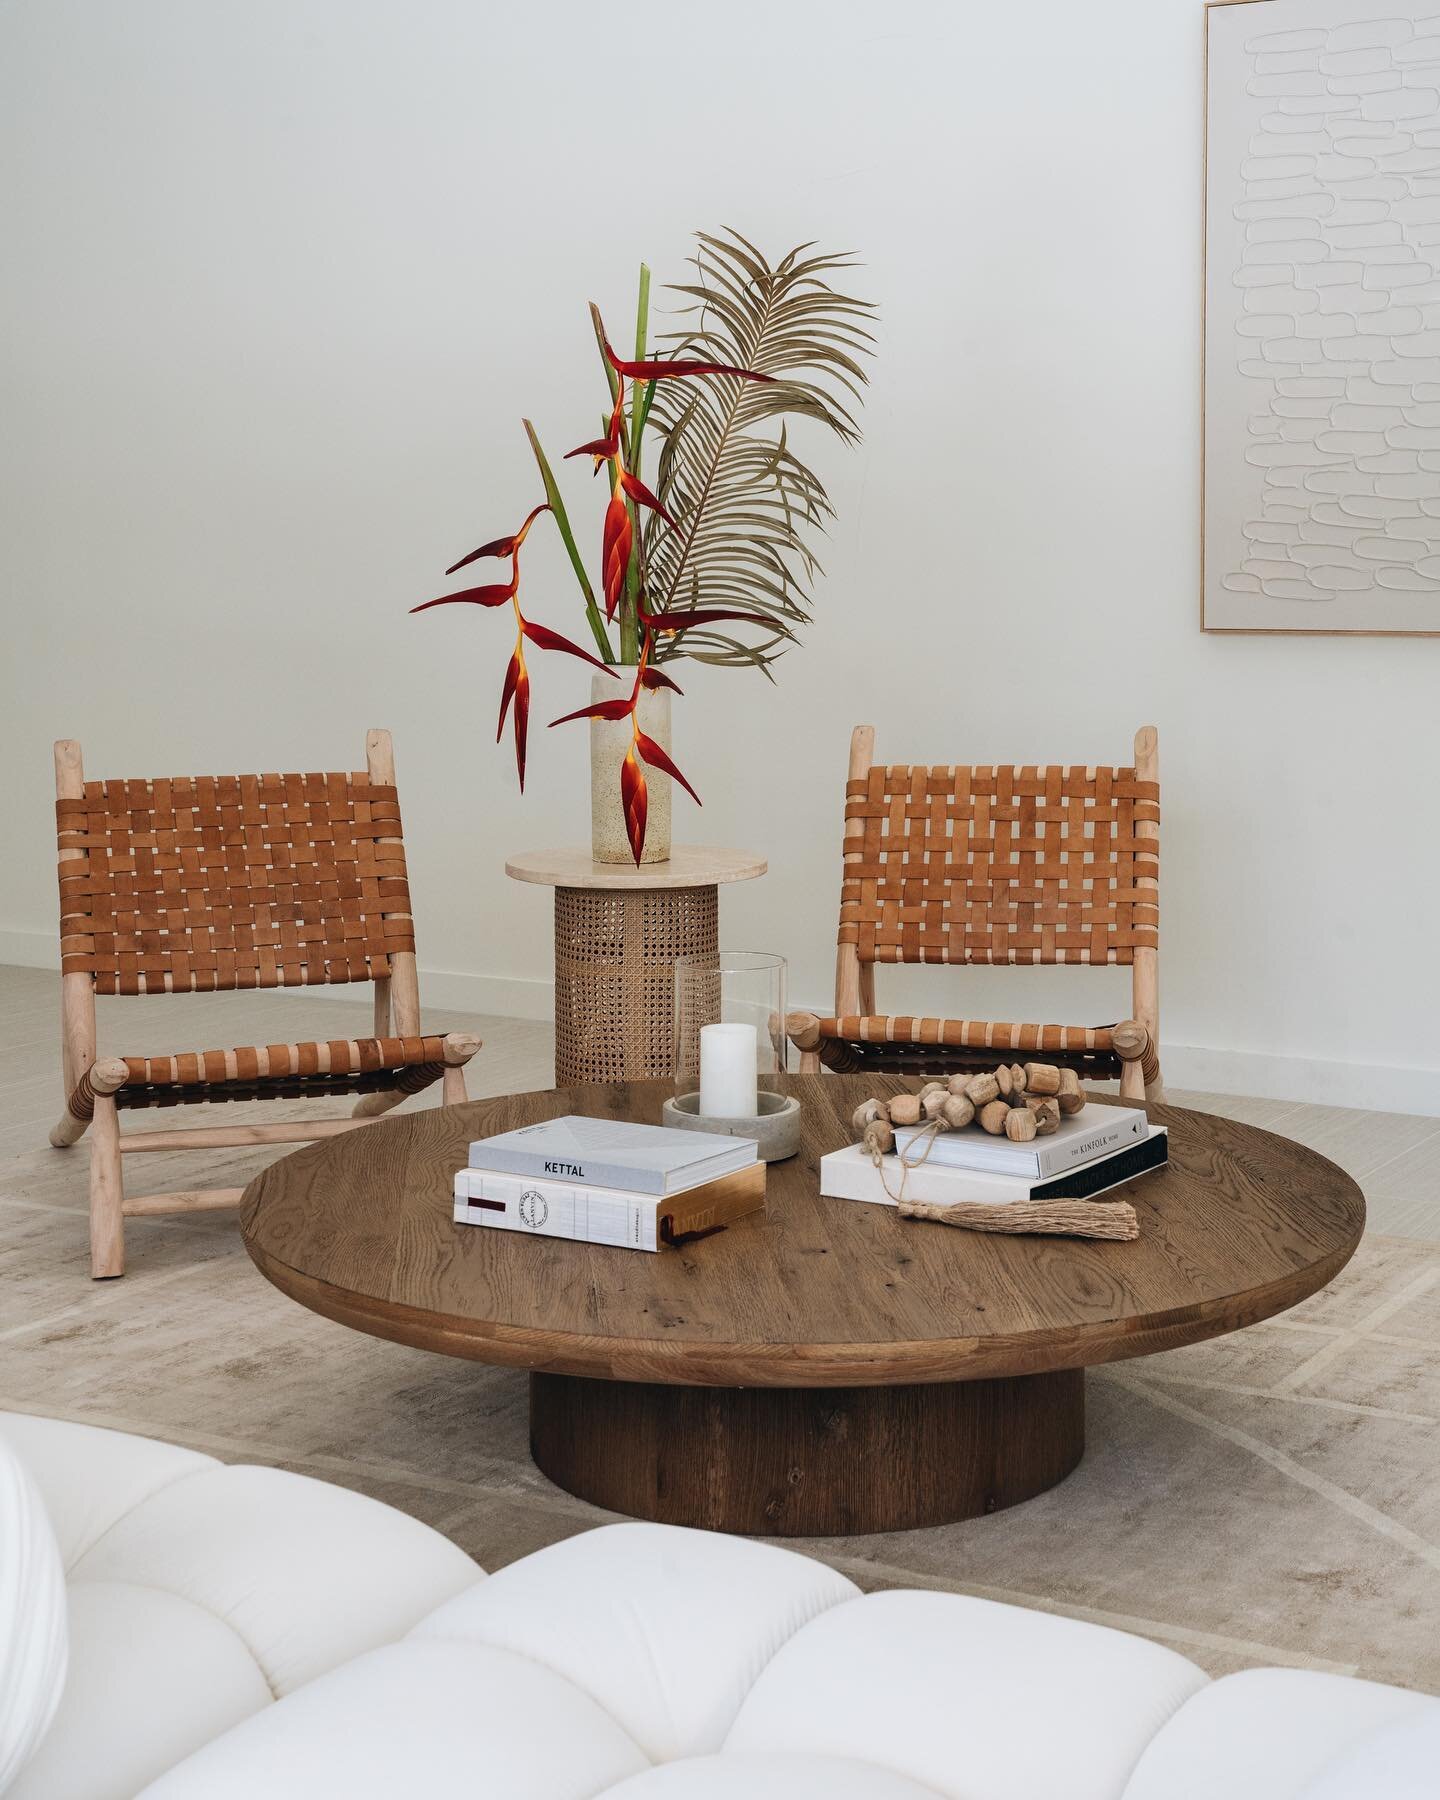 Have a seat, stay a while.

Photography by @jle_behindthelens
Florals by @meidayhawaii

#noestudio #residentialdesign #homedesign #interiordesigner #hawaiiinteriordesign #livingroom #livingroomdesign #kahala #materials #oahudesign #hawaii #honolulude